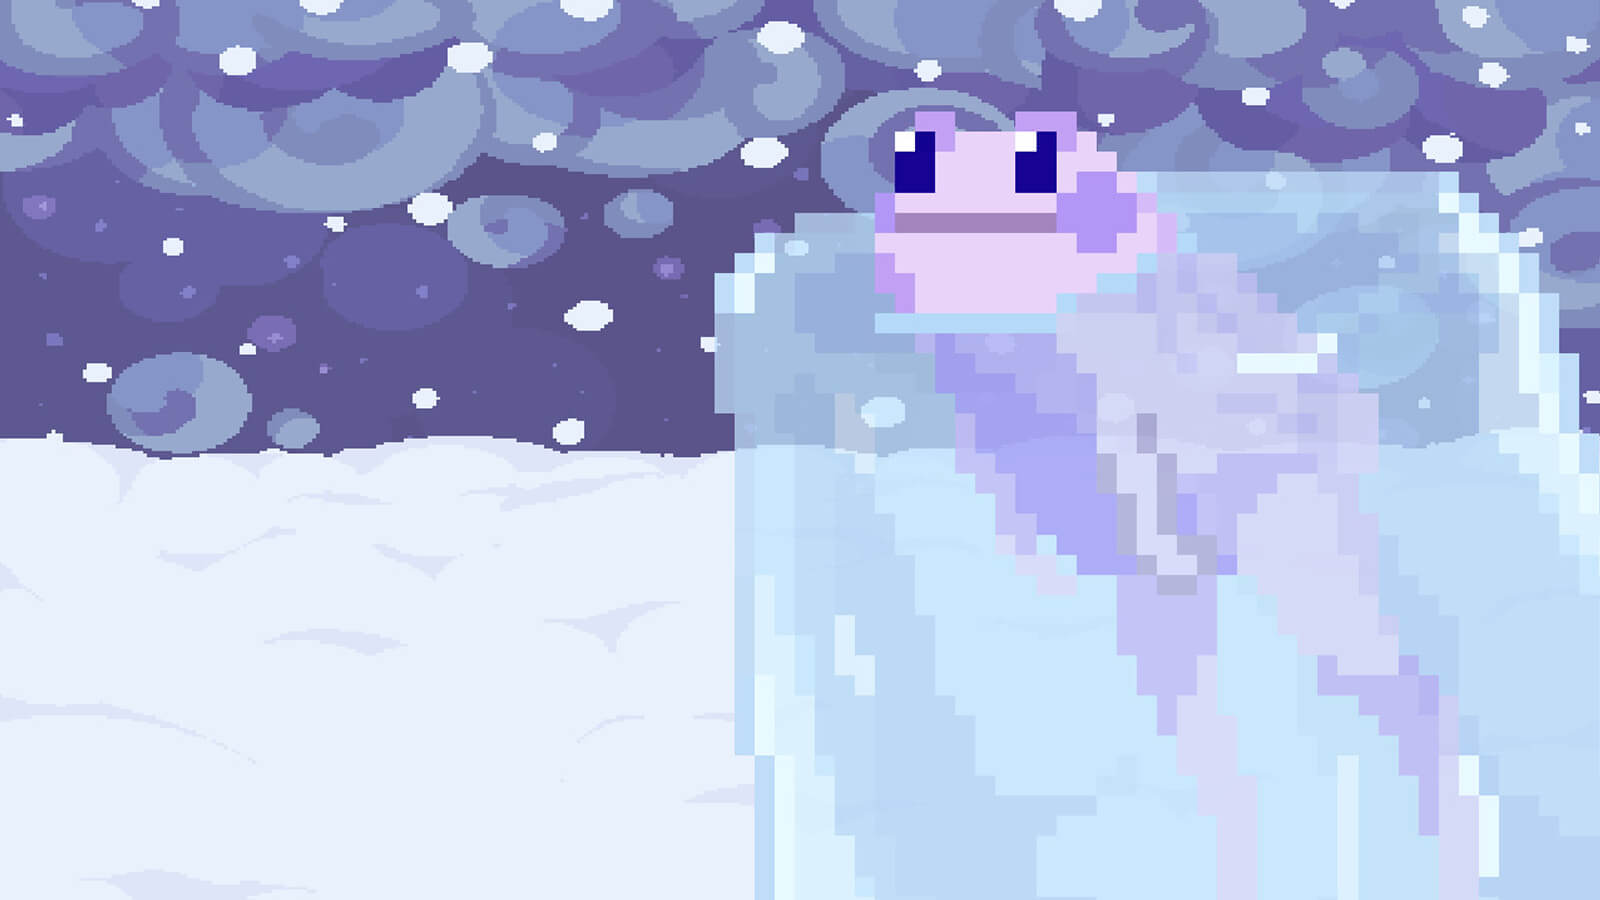 A purple frog partially frozen in ice on a snowy planet.